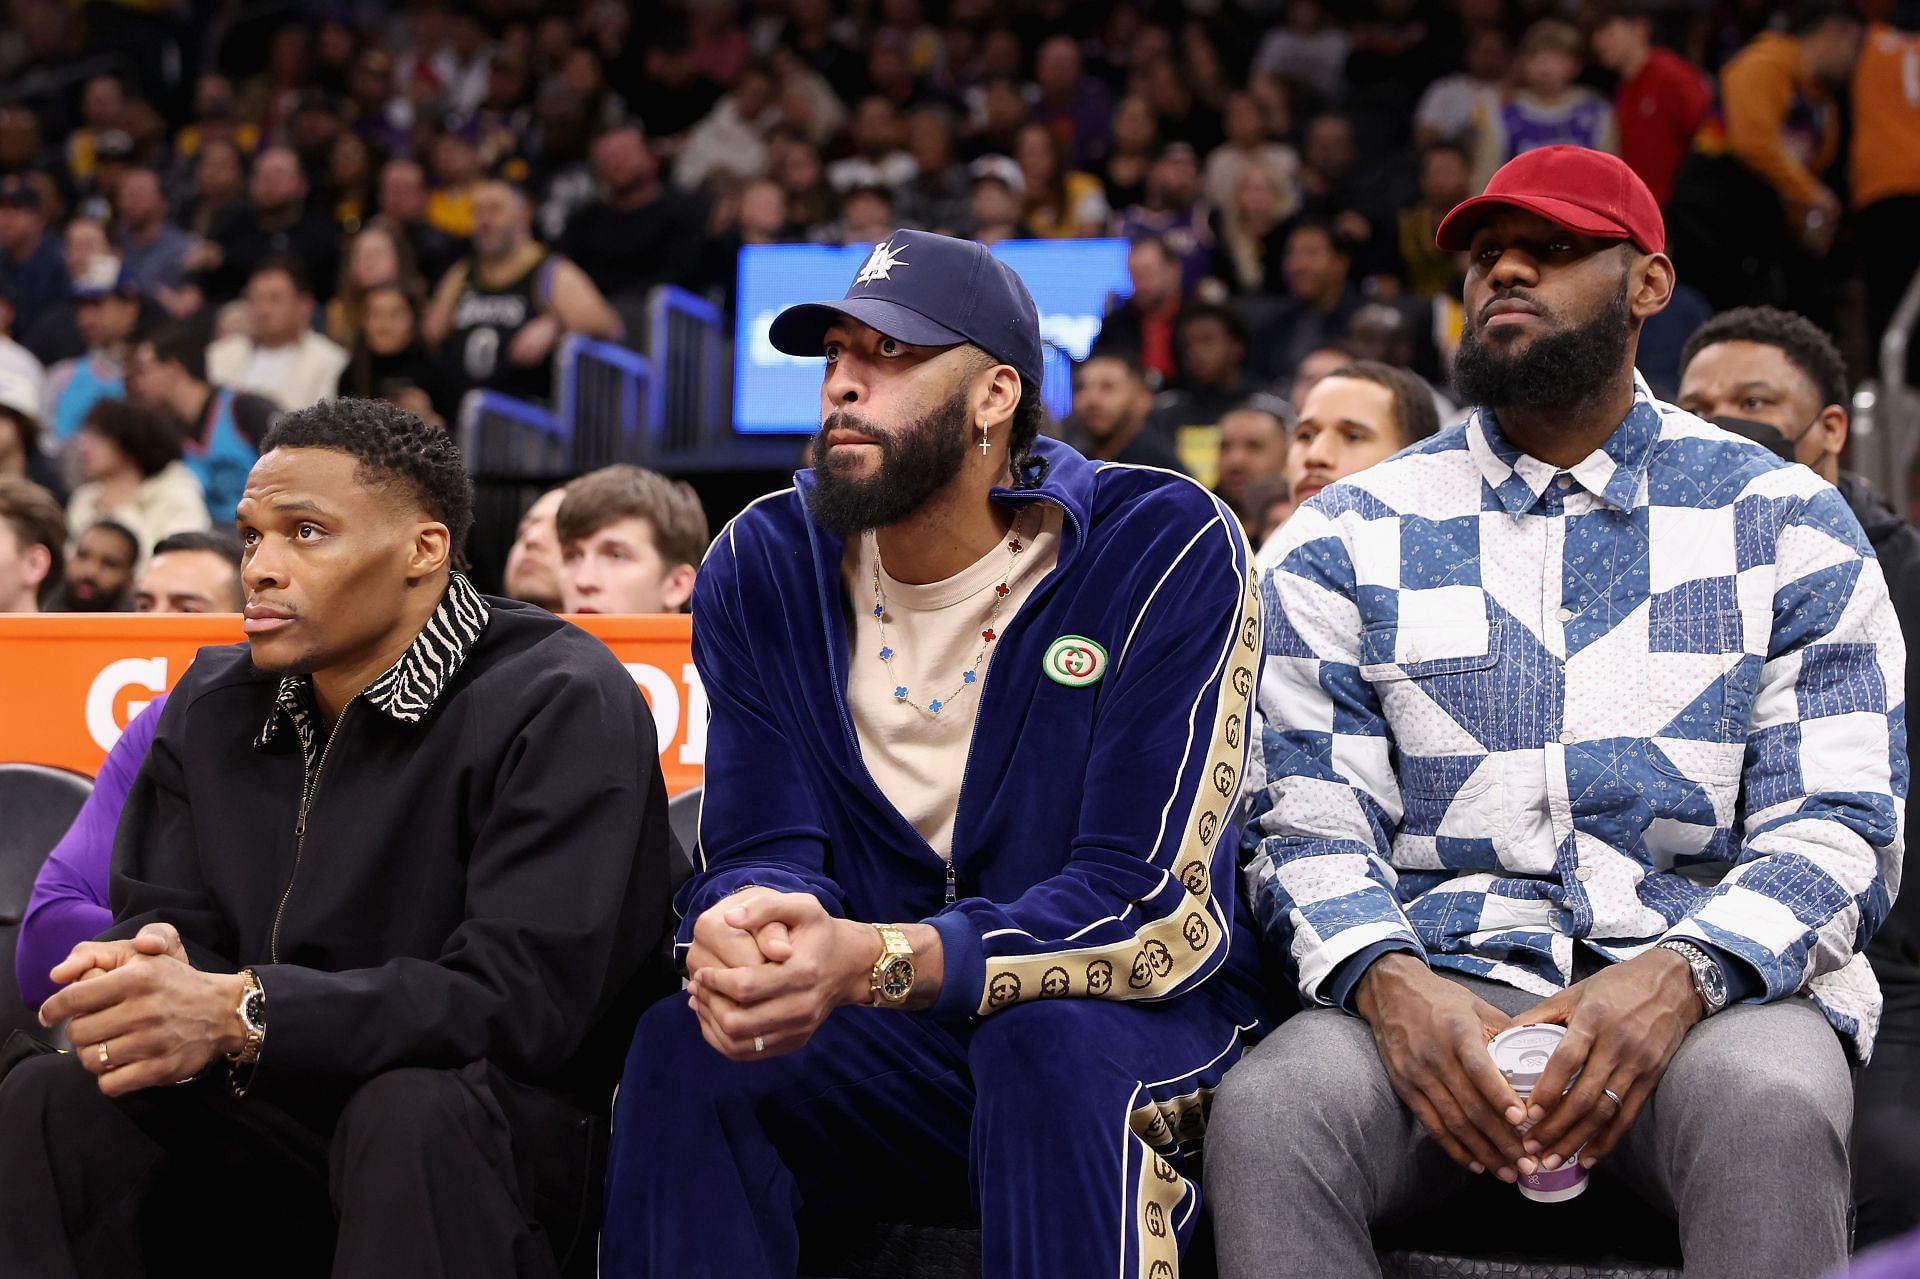 LA Lakers stars Russell Westbrook, Anthony Davis and LeBron James